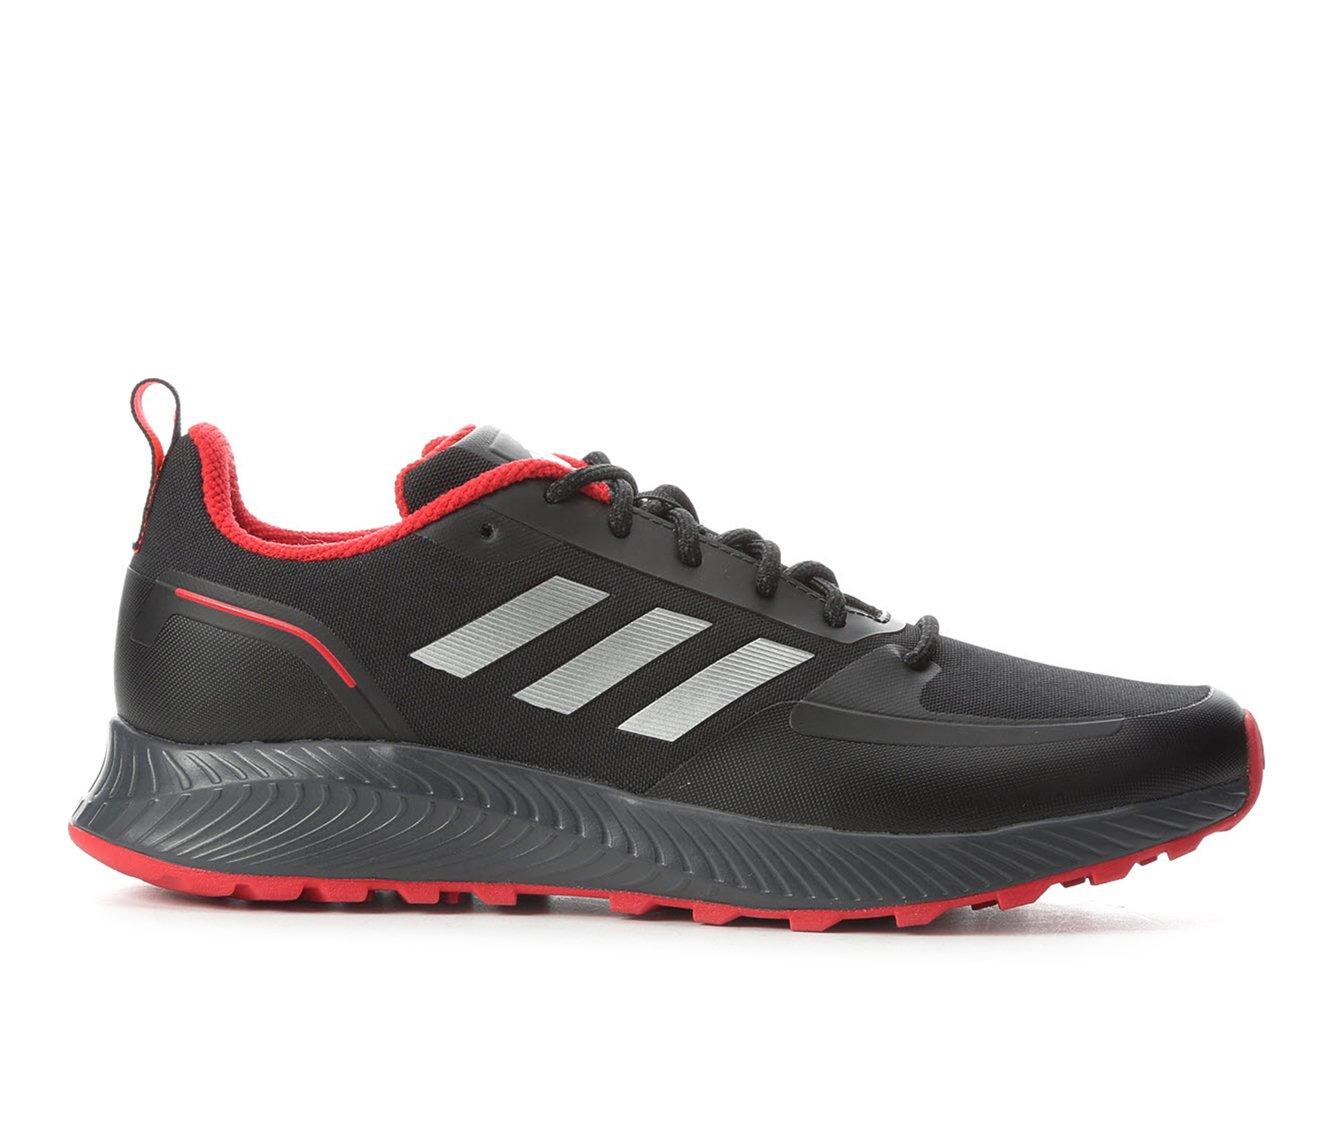 Men's Adidas 2.0 TR Trail Running Shoes